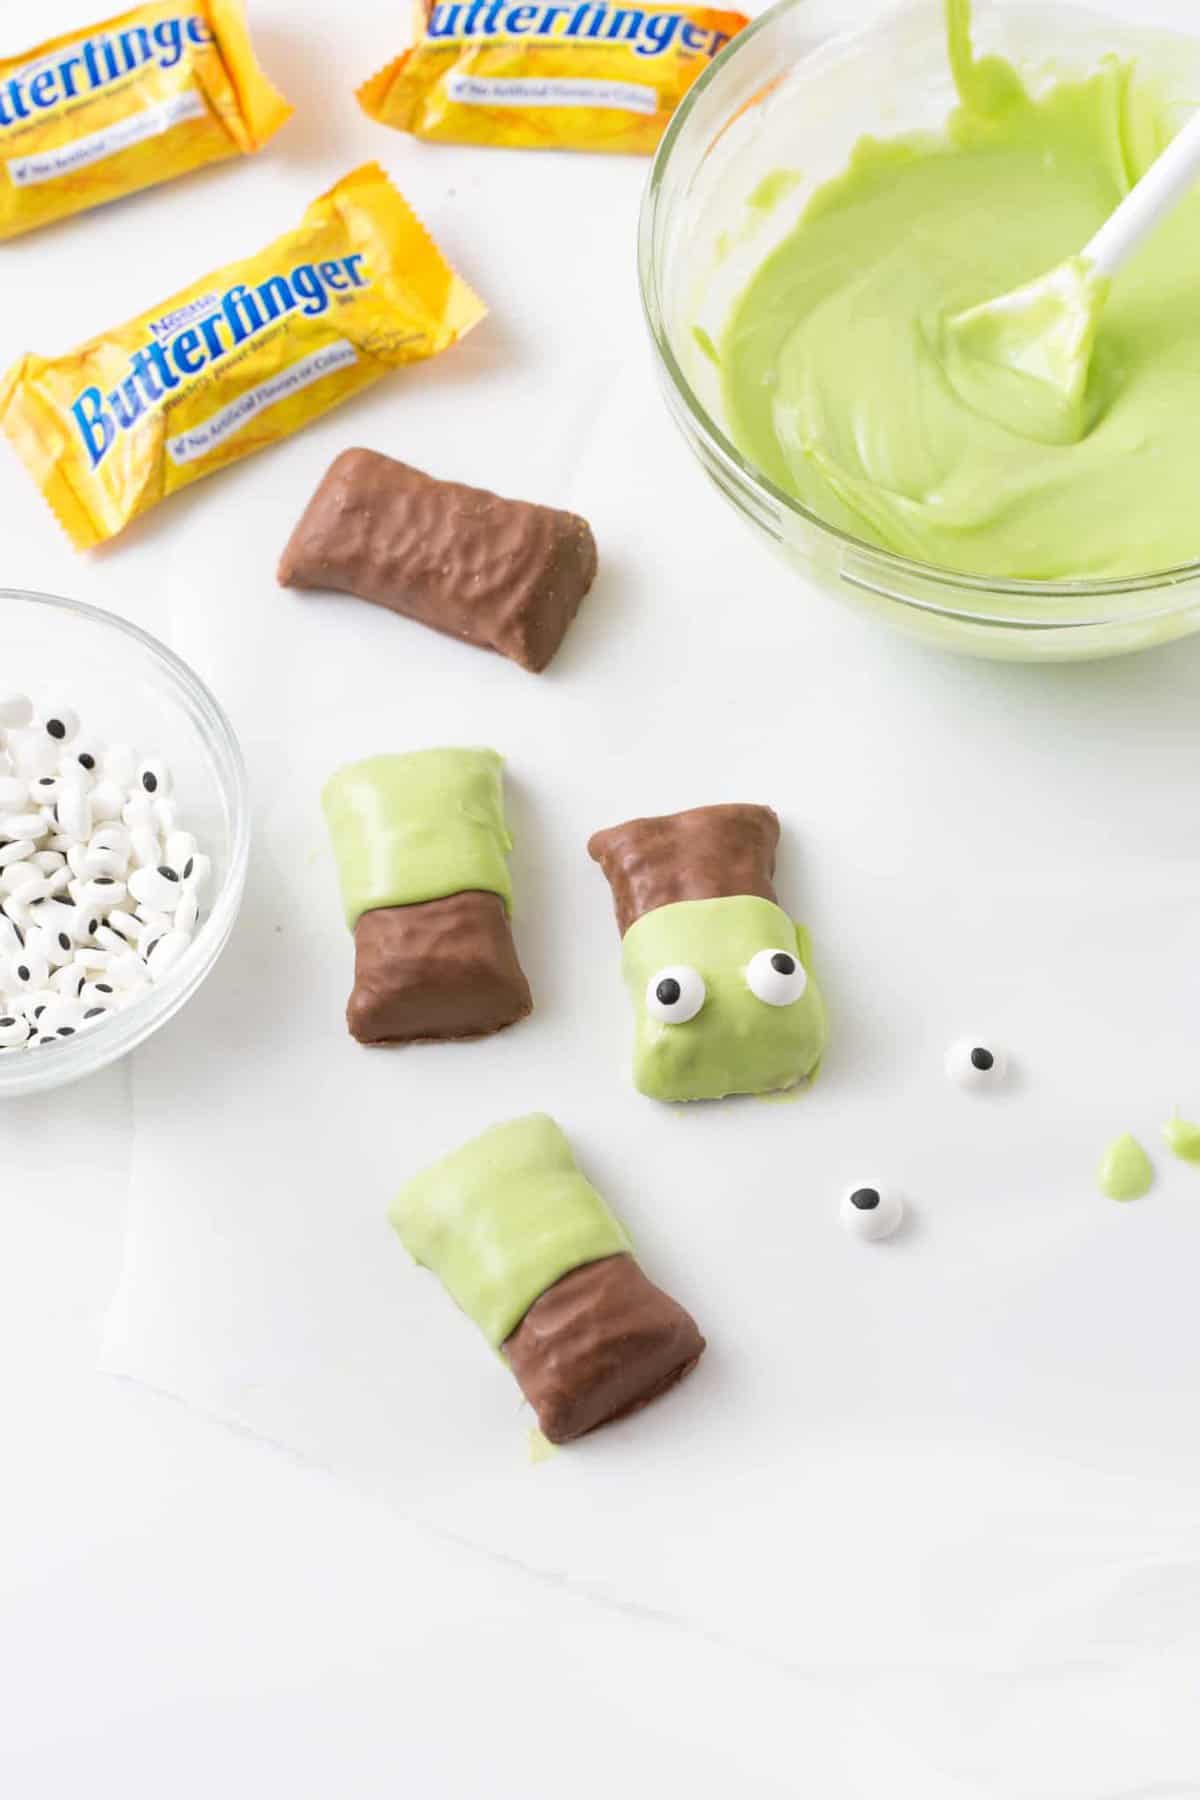 Butterfinger candy bars dipped in melted green almond bark then decorated with candy eyeballs on top to look like Frankenstein.